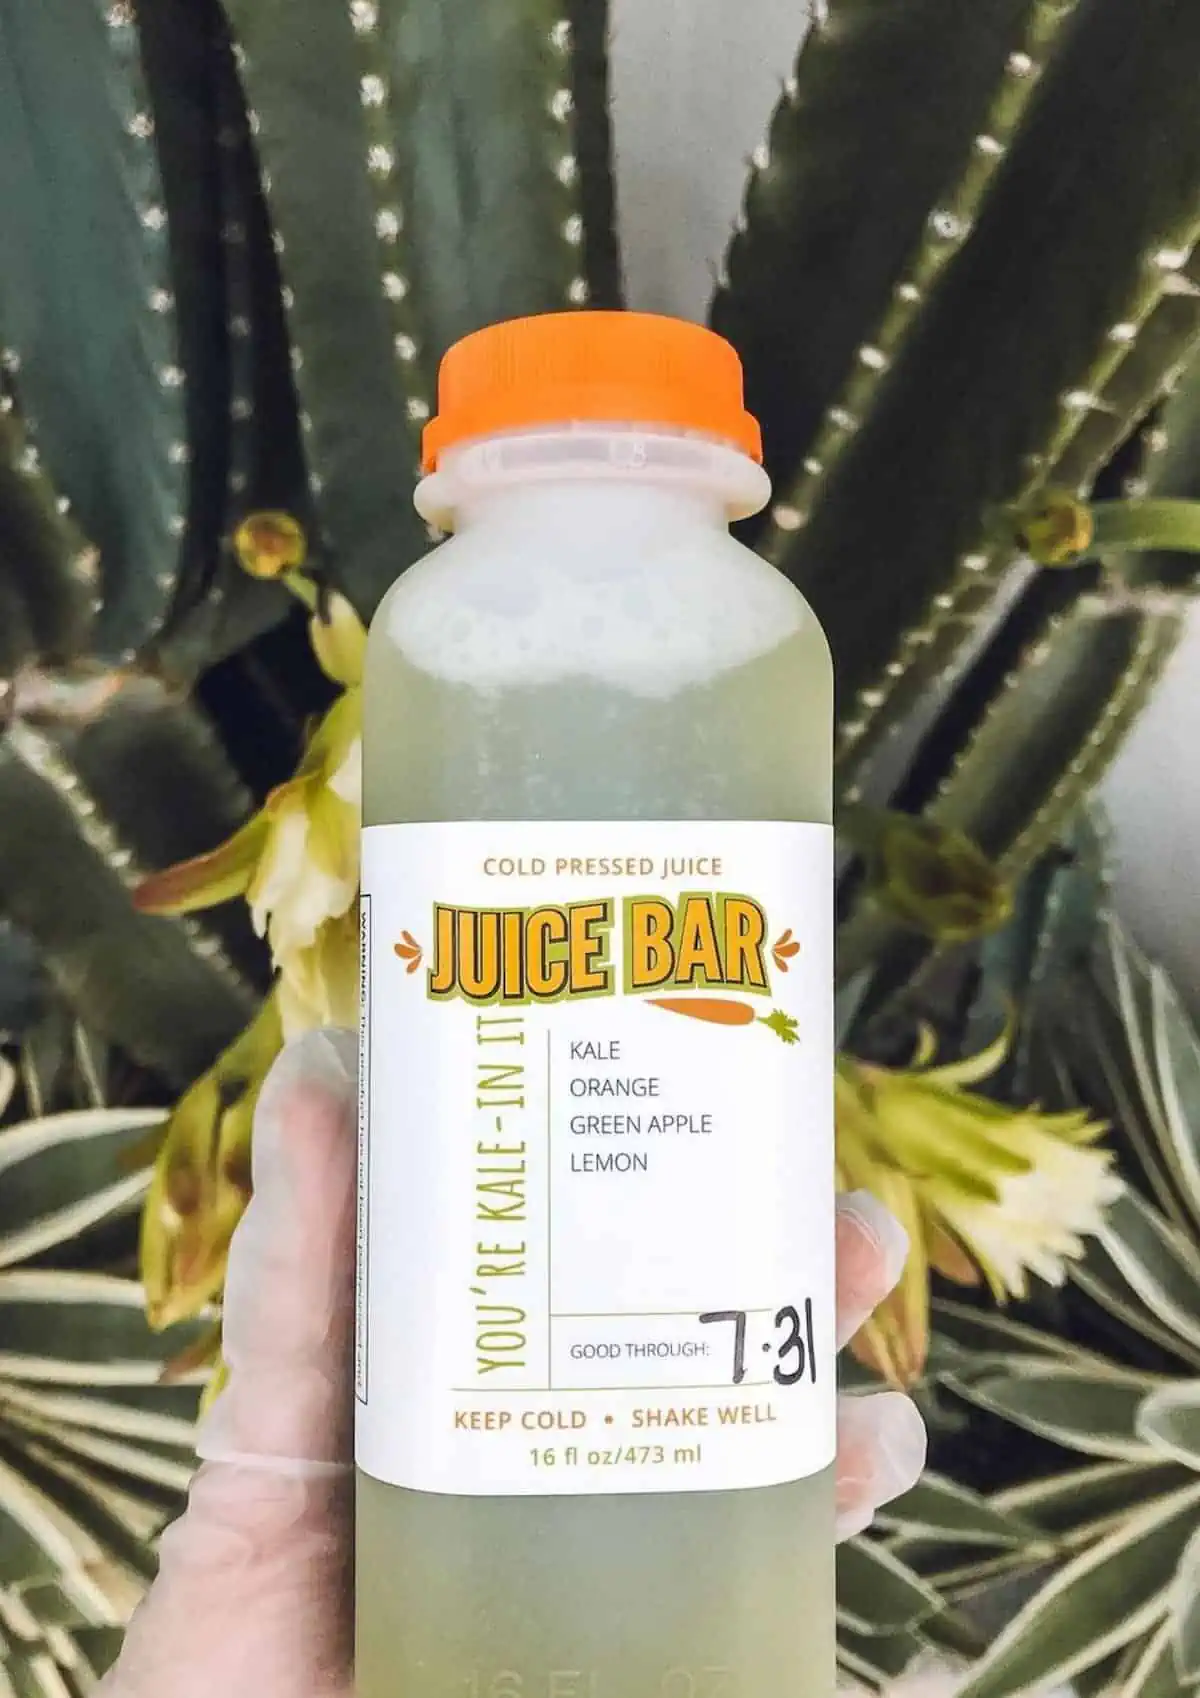 Cold-pressed juice from Juice Bar Orlando.